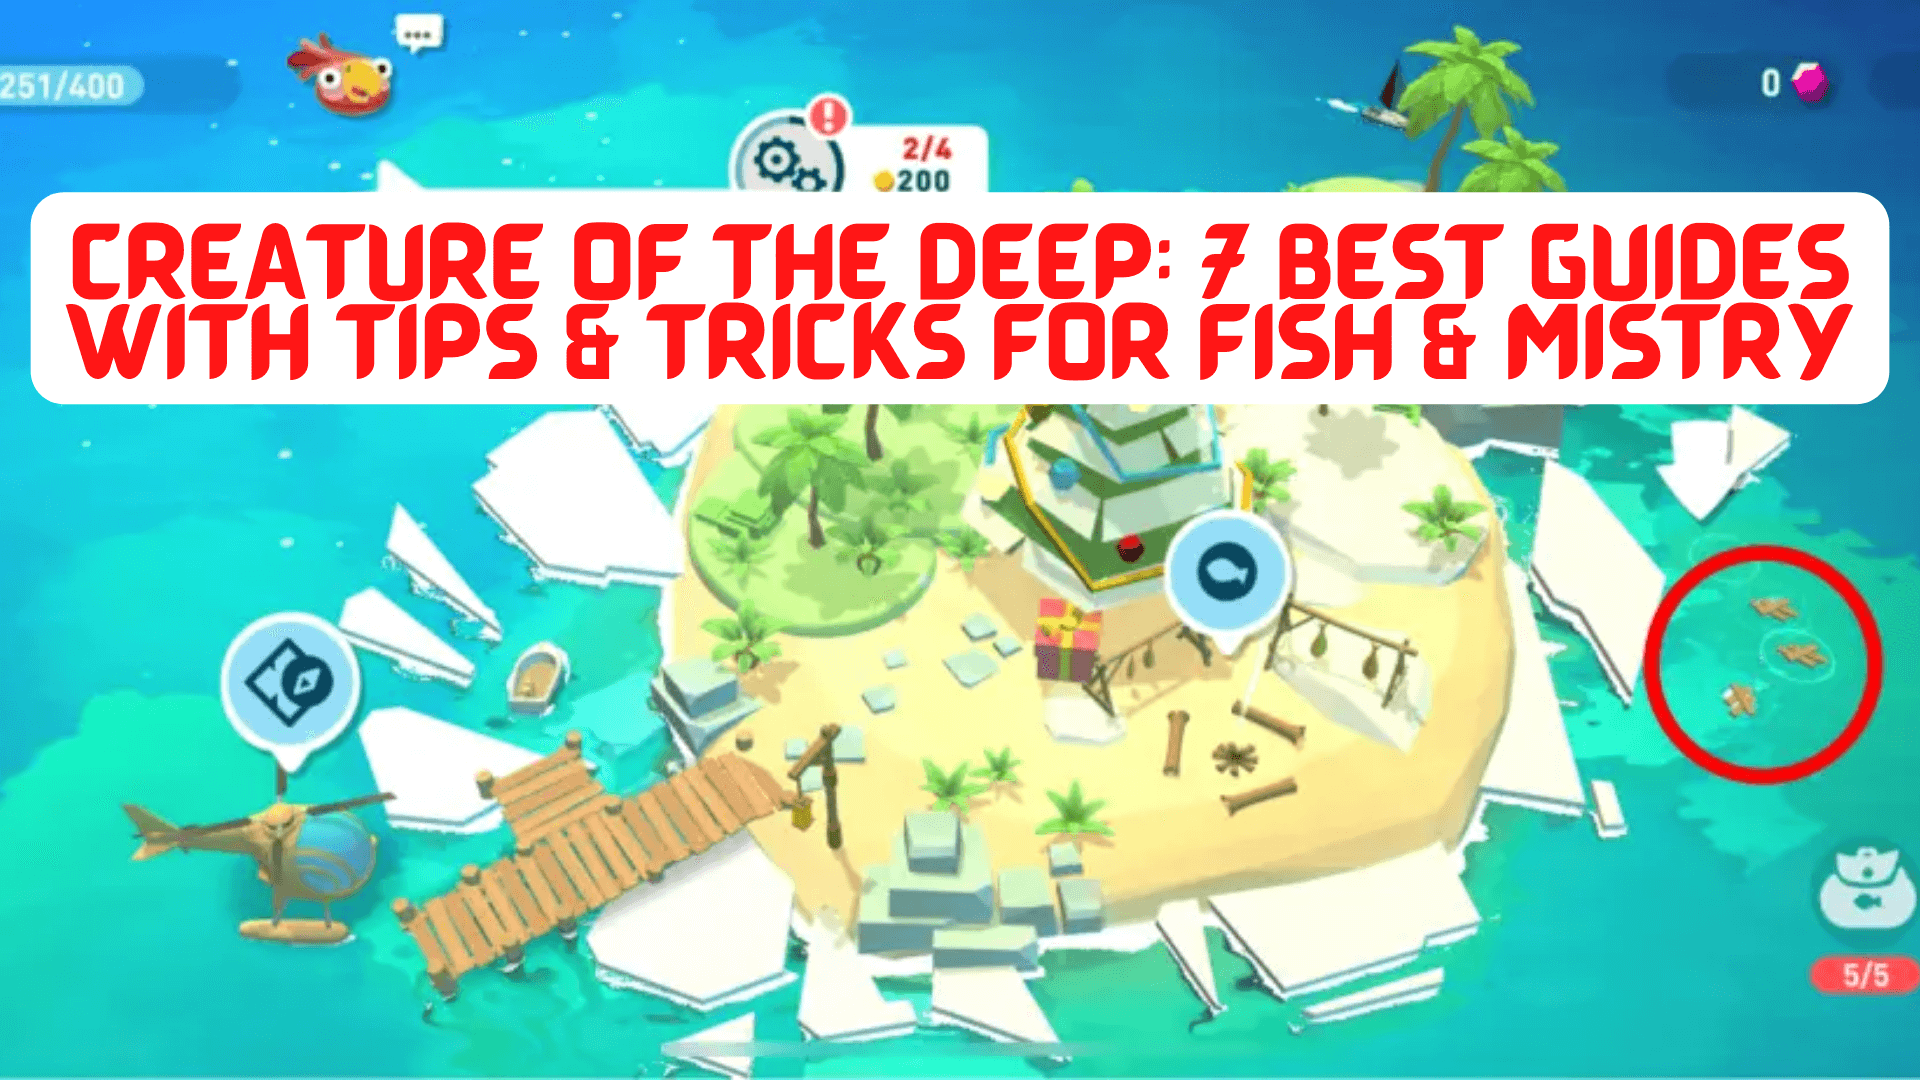 Creature of the Deep: 7 best guides with Tips & Tricks for fish and Mistry